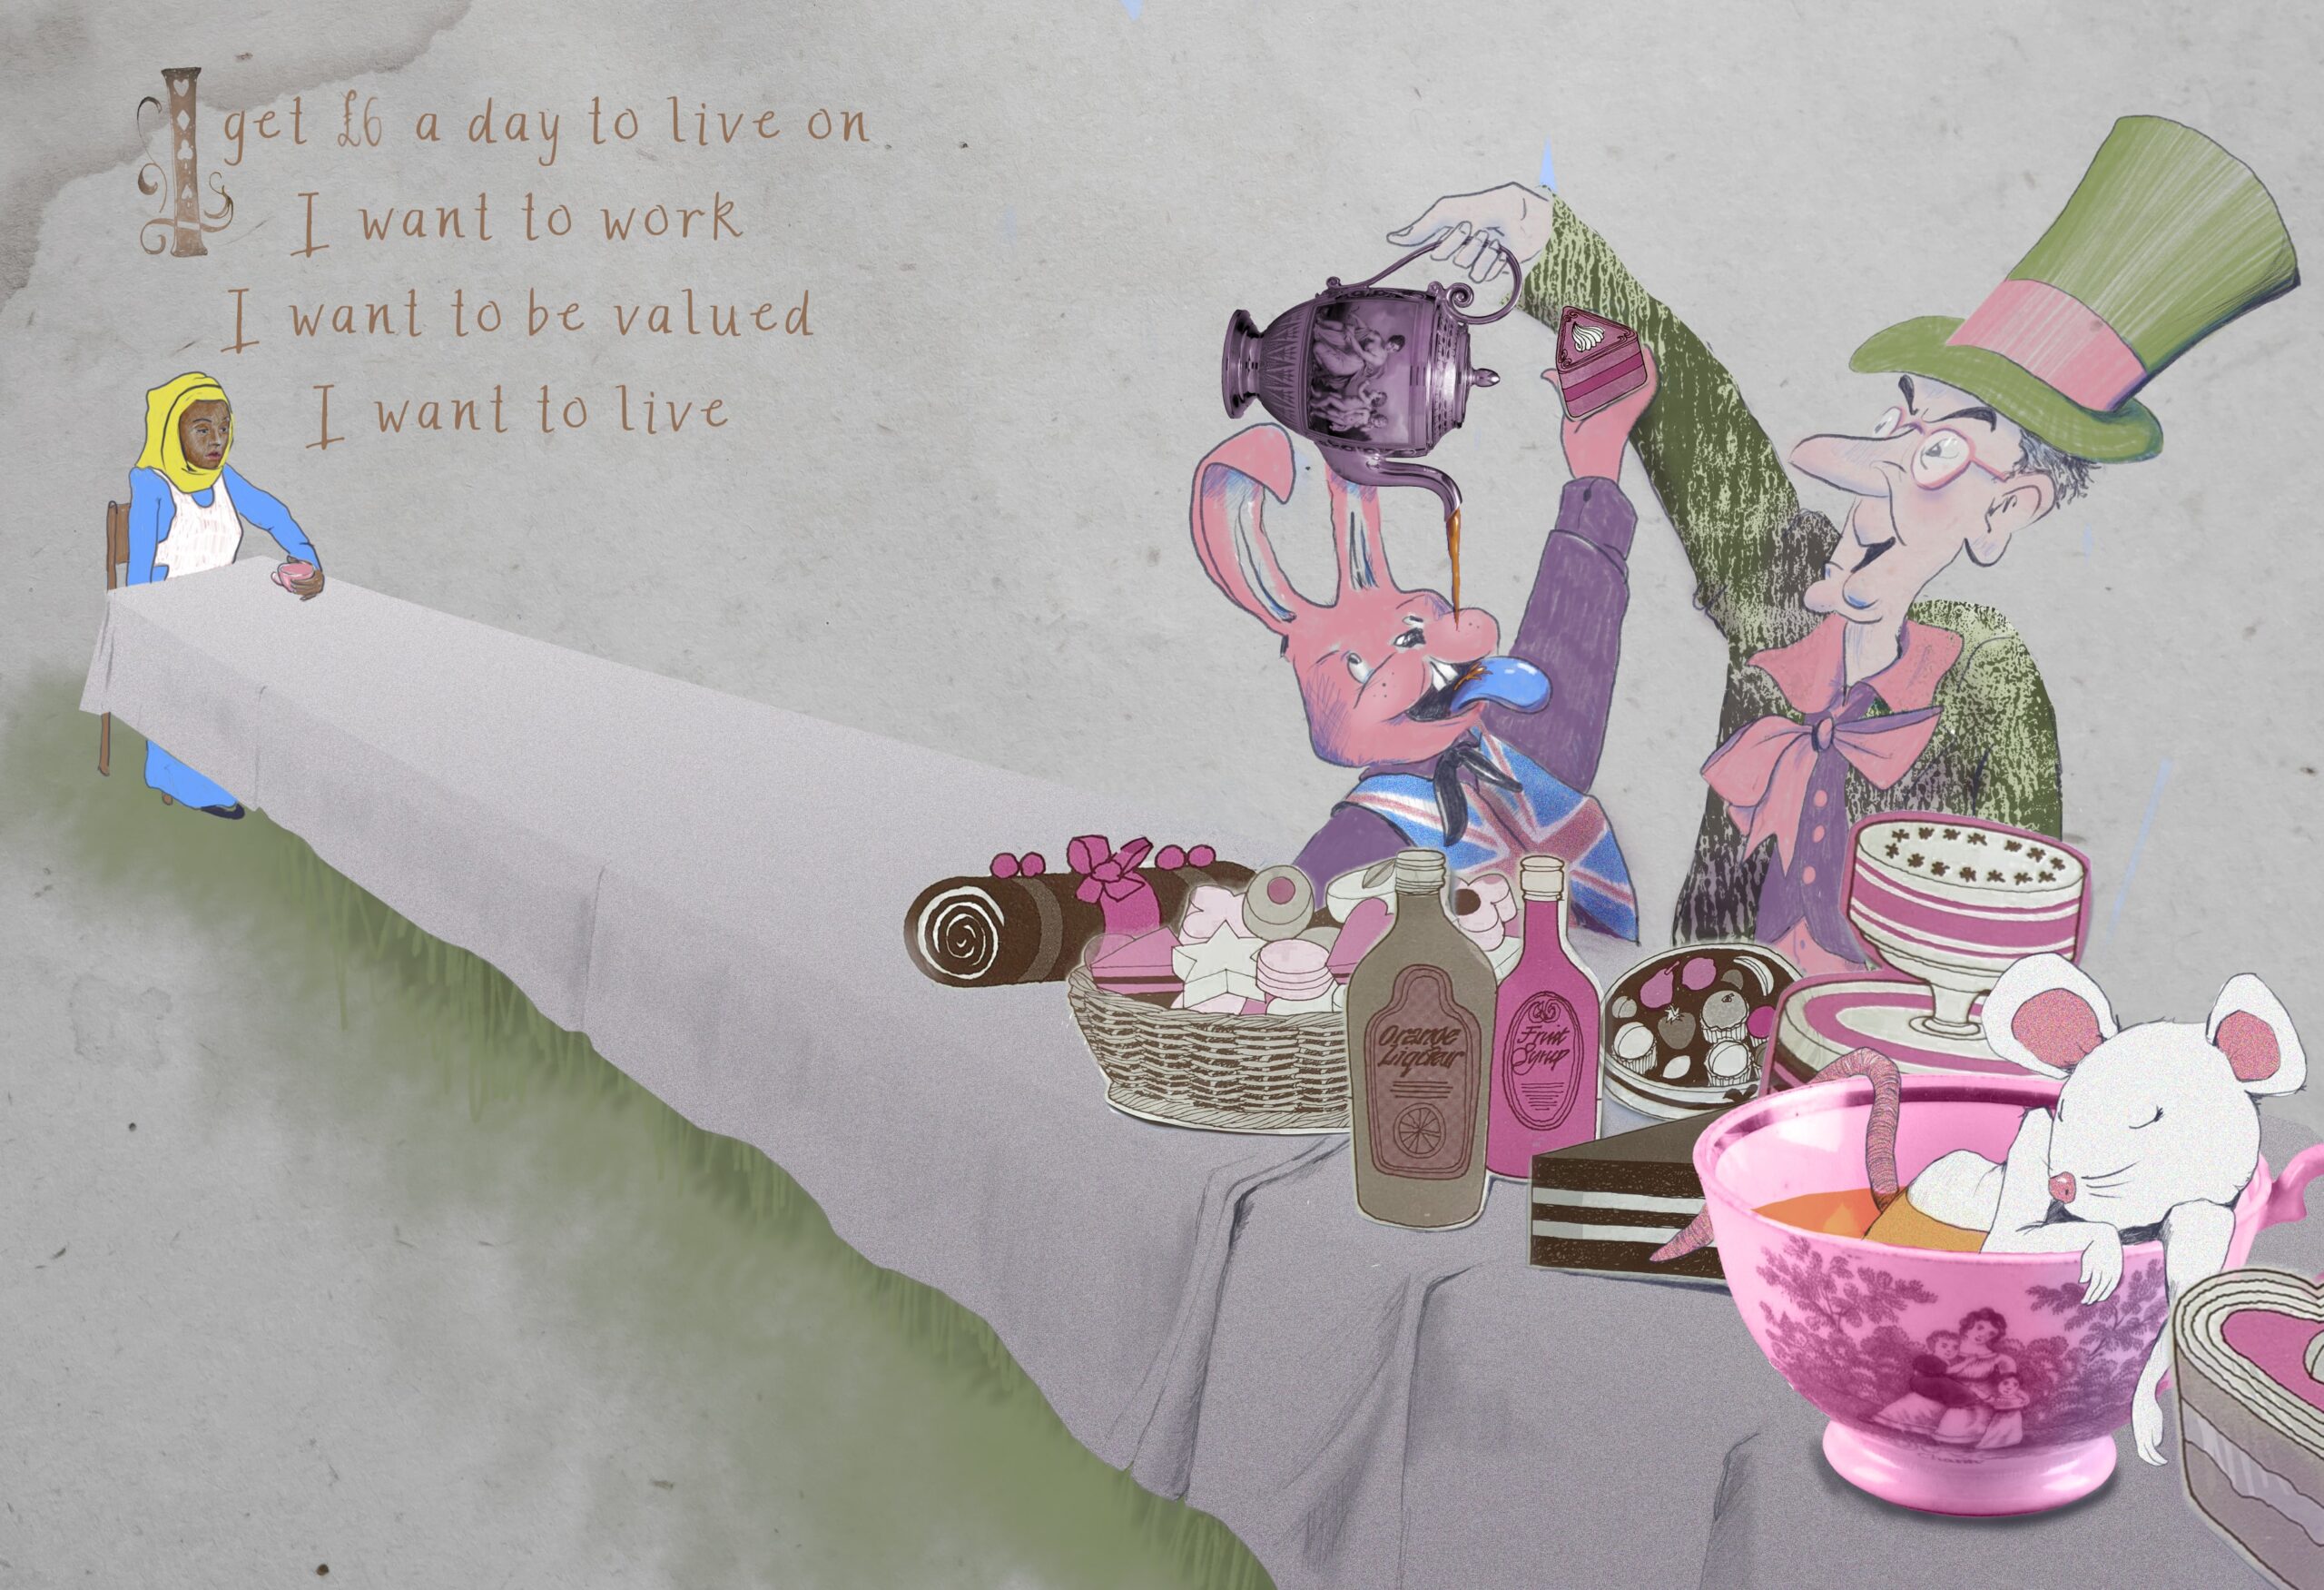 Alice sits at the far end of the table. To the right of the image a man in a top hat pours tea into the mouth of a rabbit in a Union Jack waste coat. They are all sat at a long table laid with a tea party. A mouse is sleeping in a cup. The caption reads "I get £6 a day to live on I want to work, I want to be valued, I want to live\2